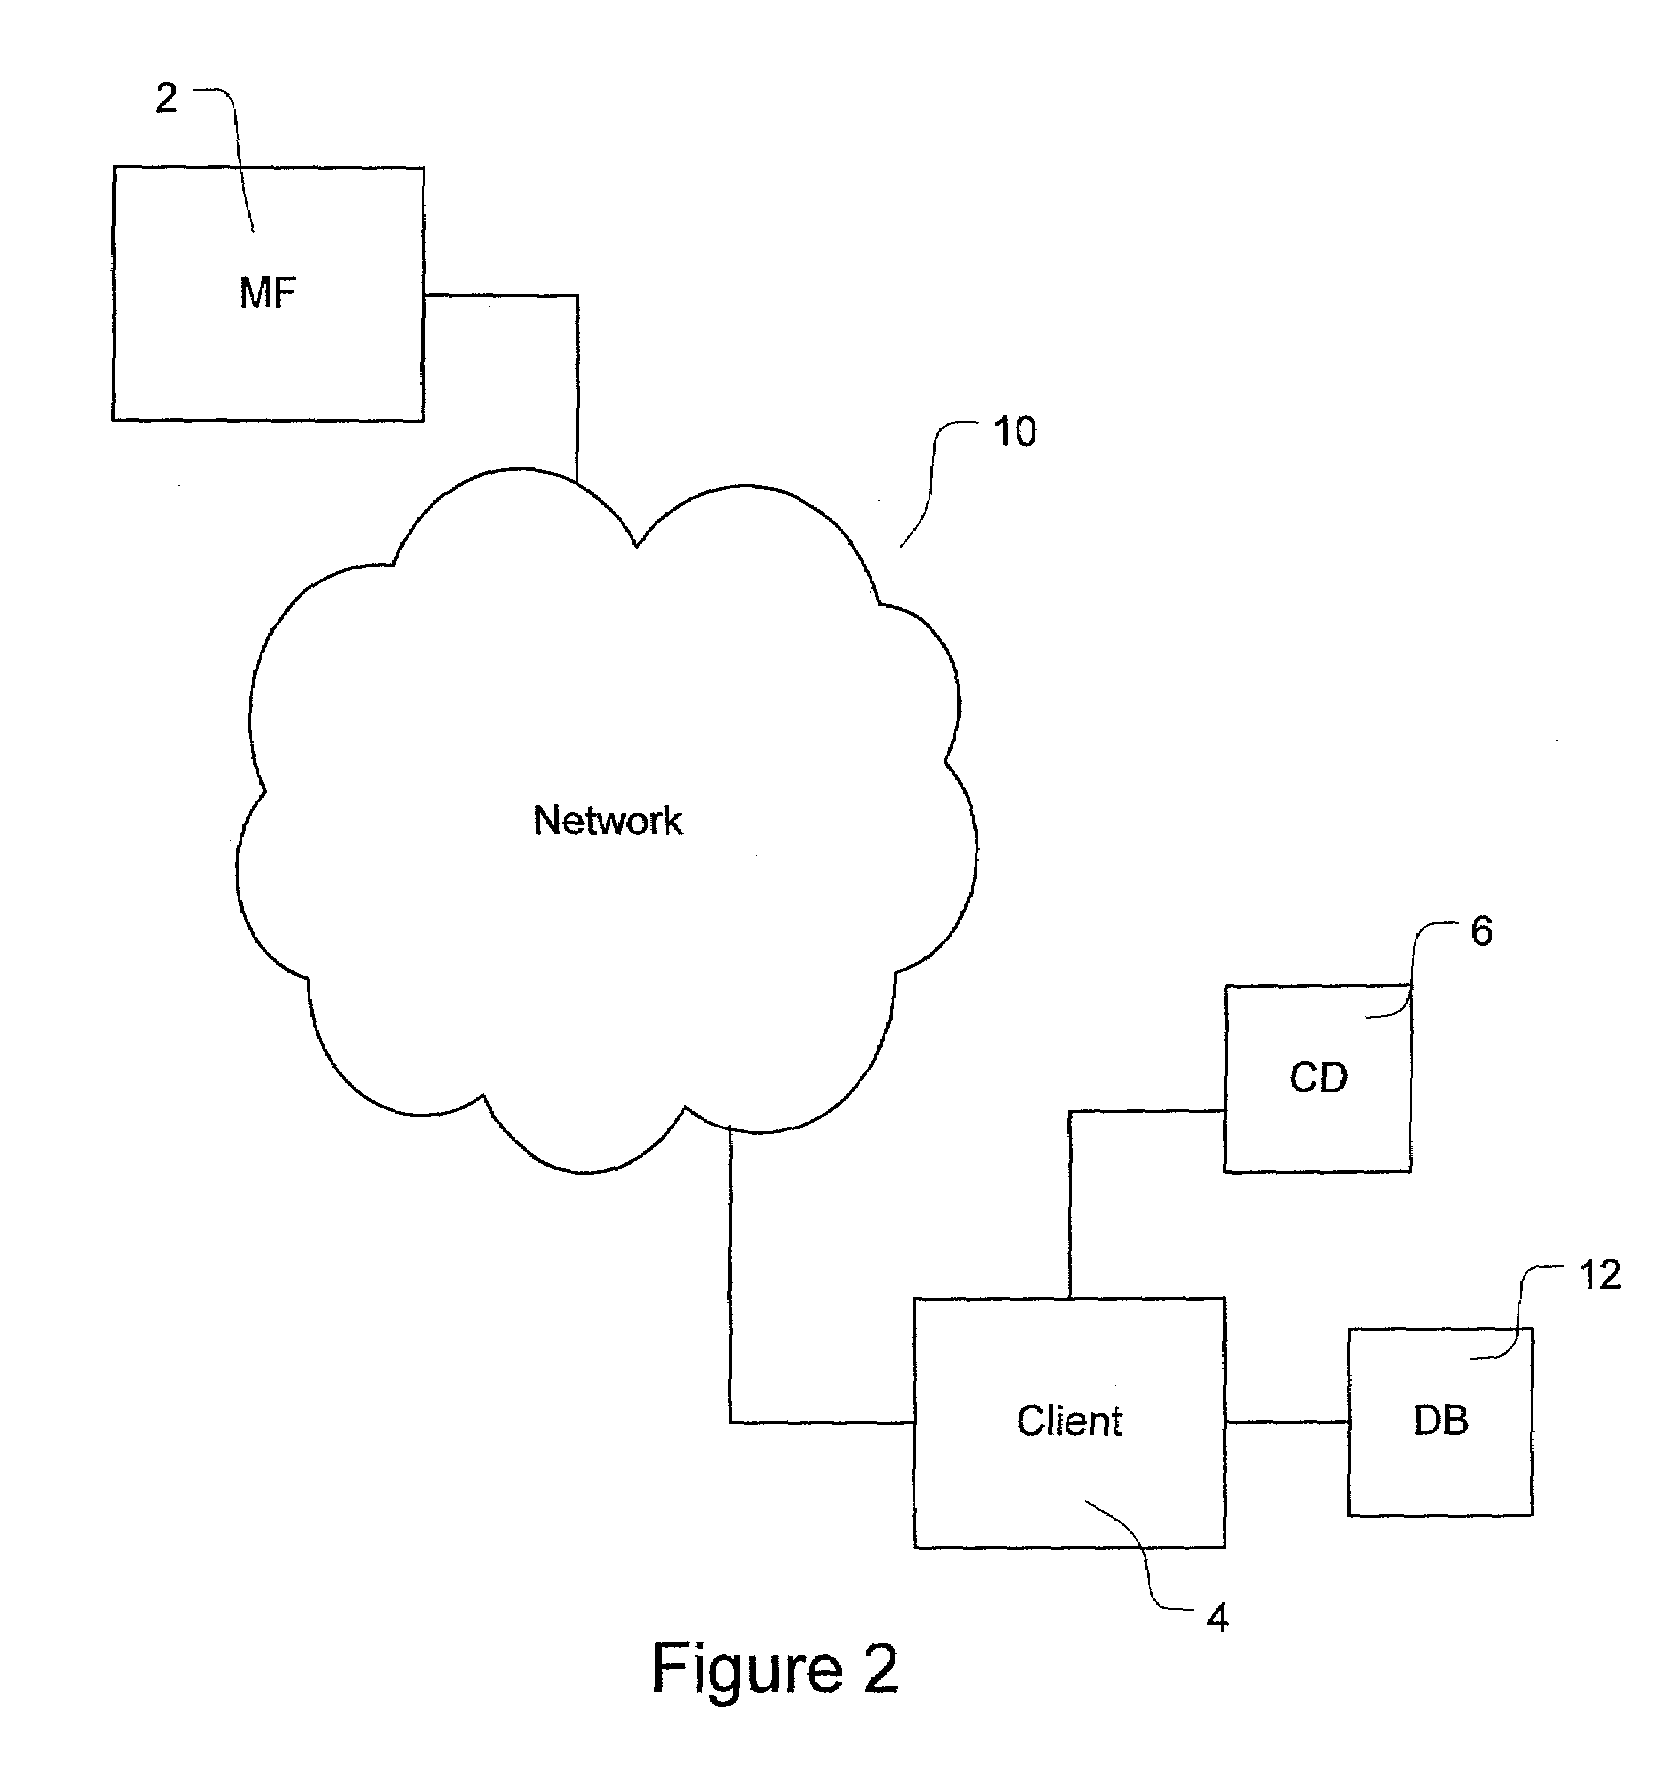 System and method for expediting and automating mainframe computer setup